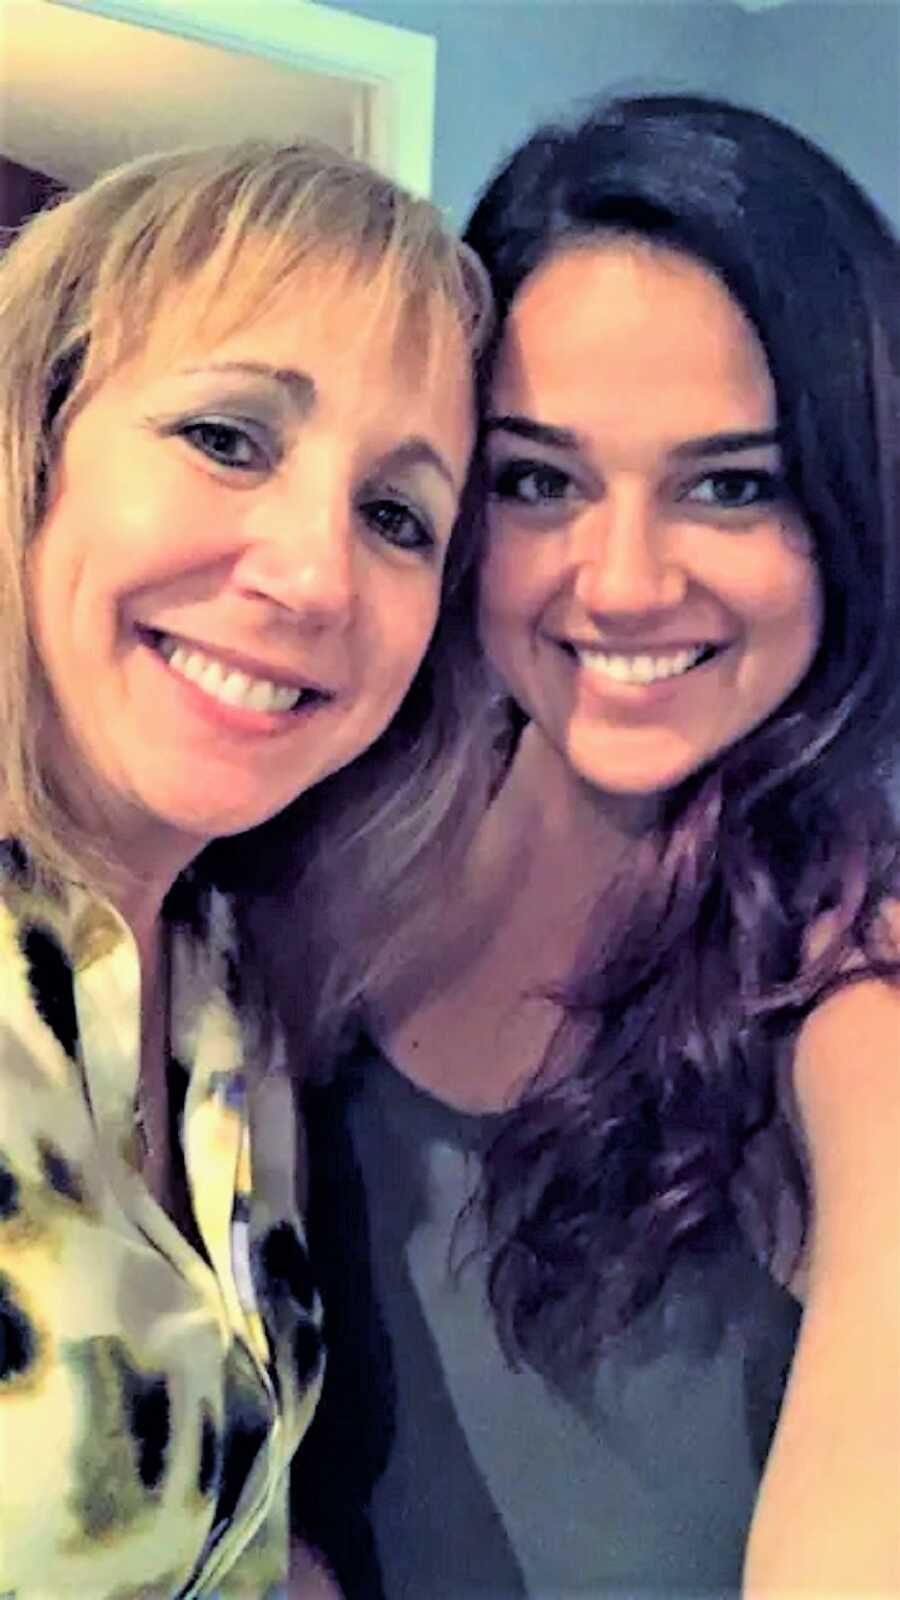 selfie of mother and daughter smiling close together 